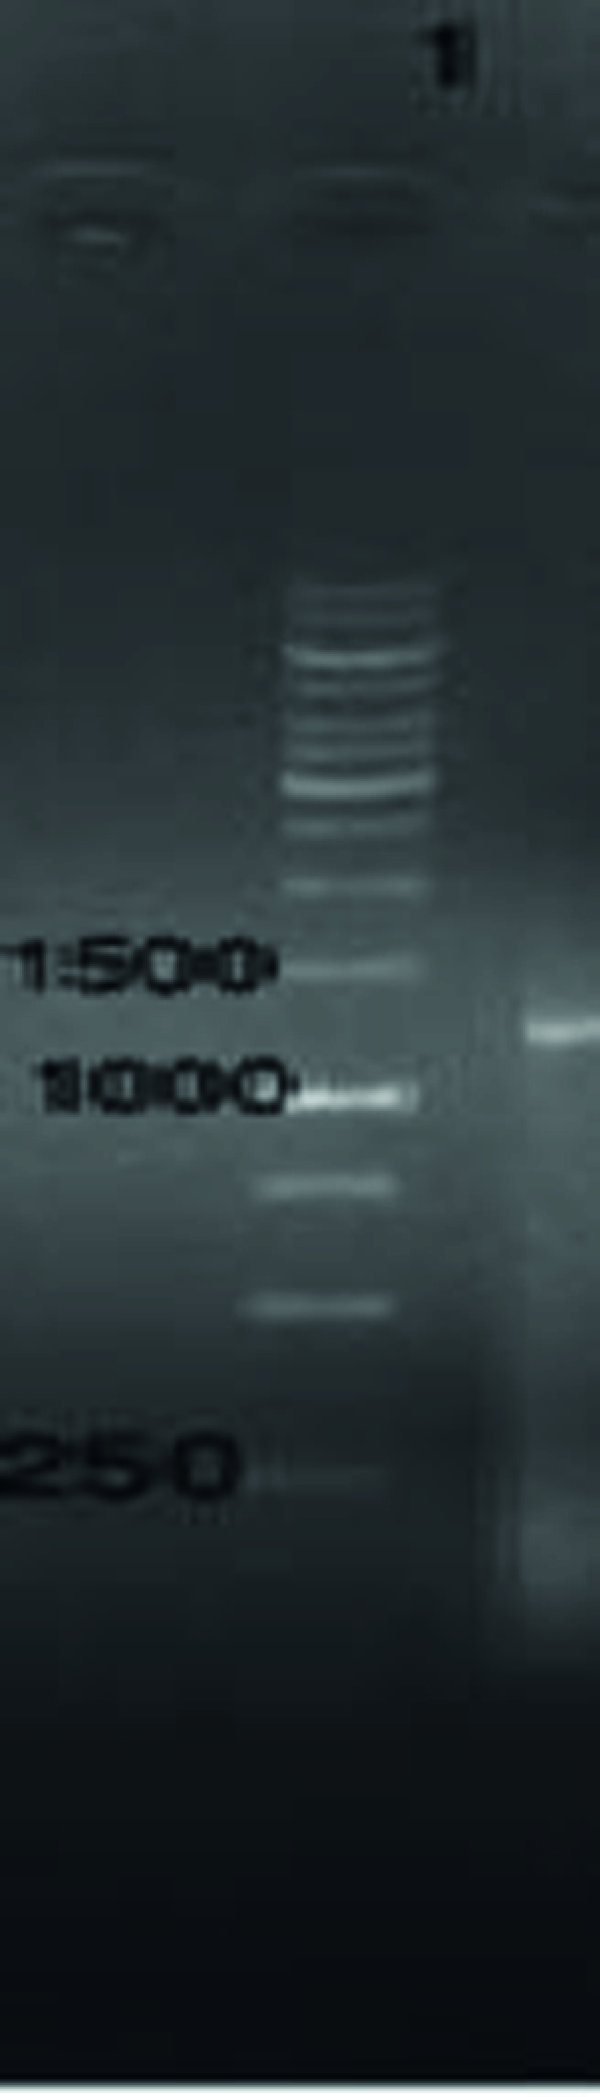 Lane 1: Molecular weight marker (1 kb ladder); Lanes 2 and 3: amplified ROP1 with 1183 bp band.